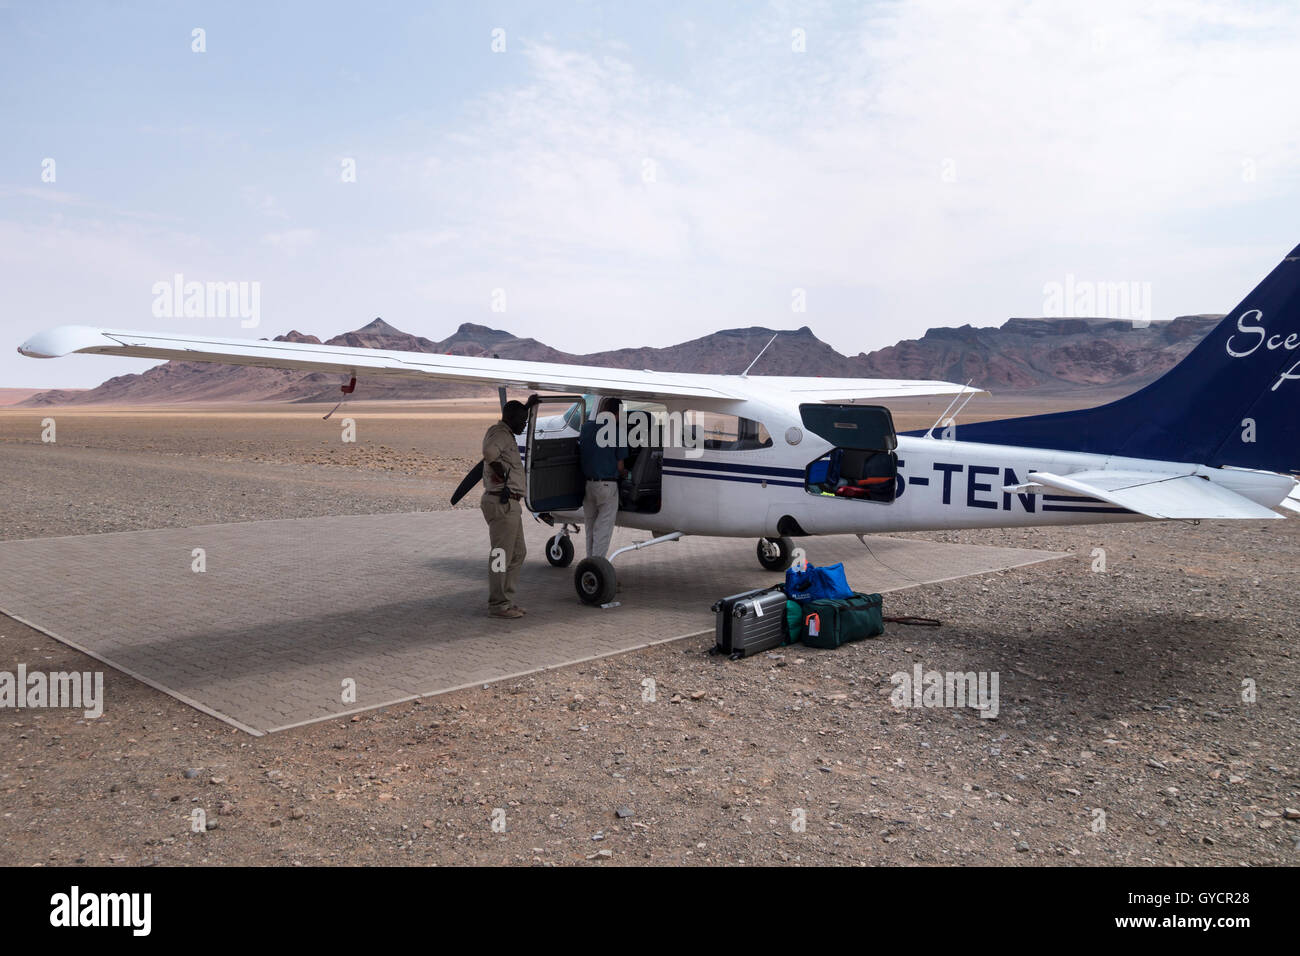 Passengers luggage being loaded into light aircraft flying between Swakopmund and Sossusvlei, Namibia Stock Photo